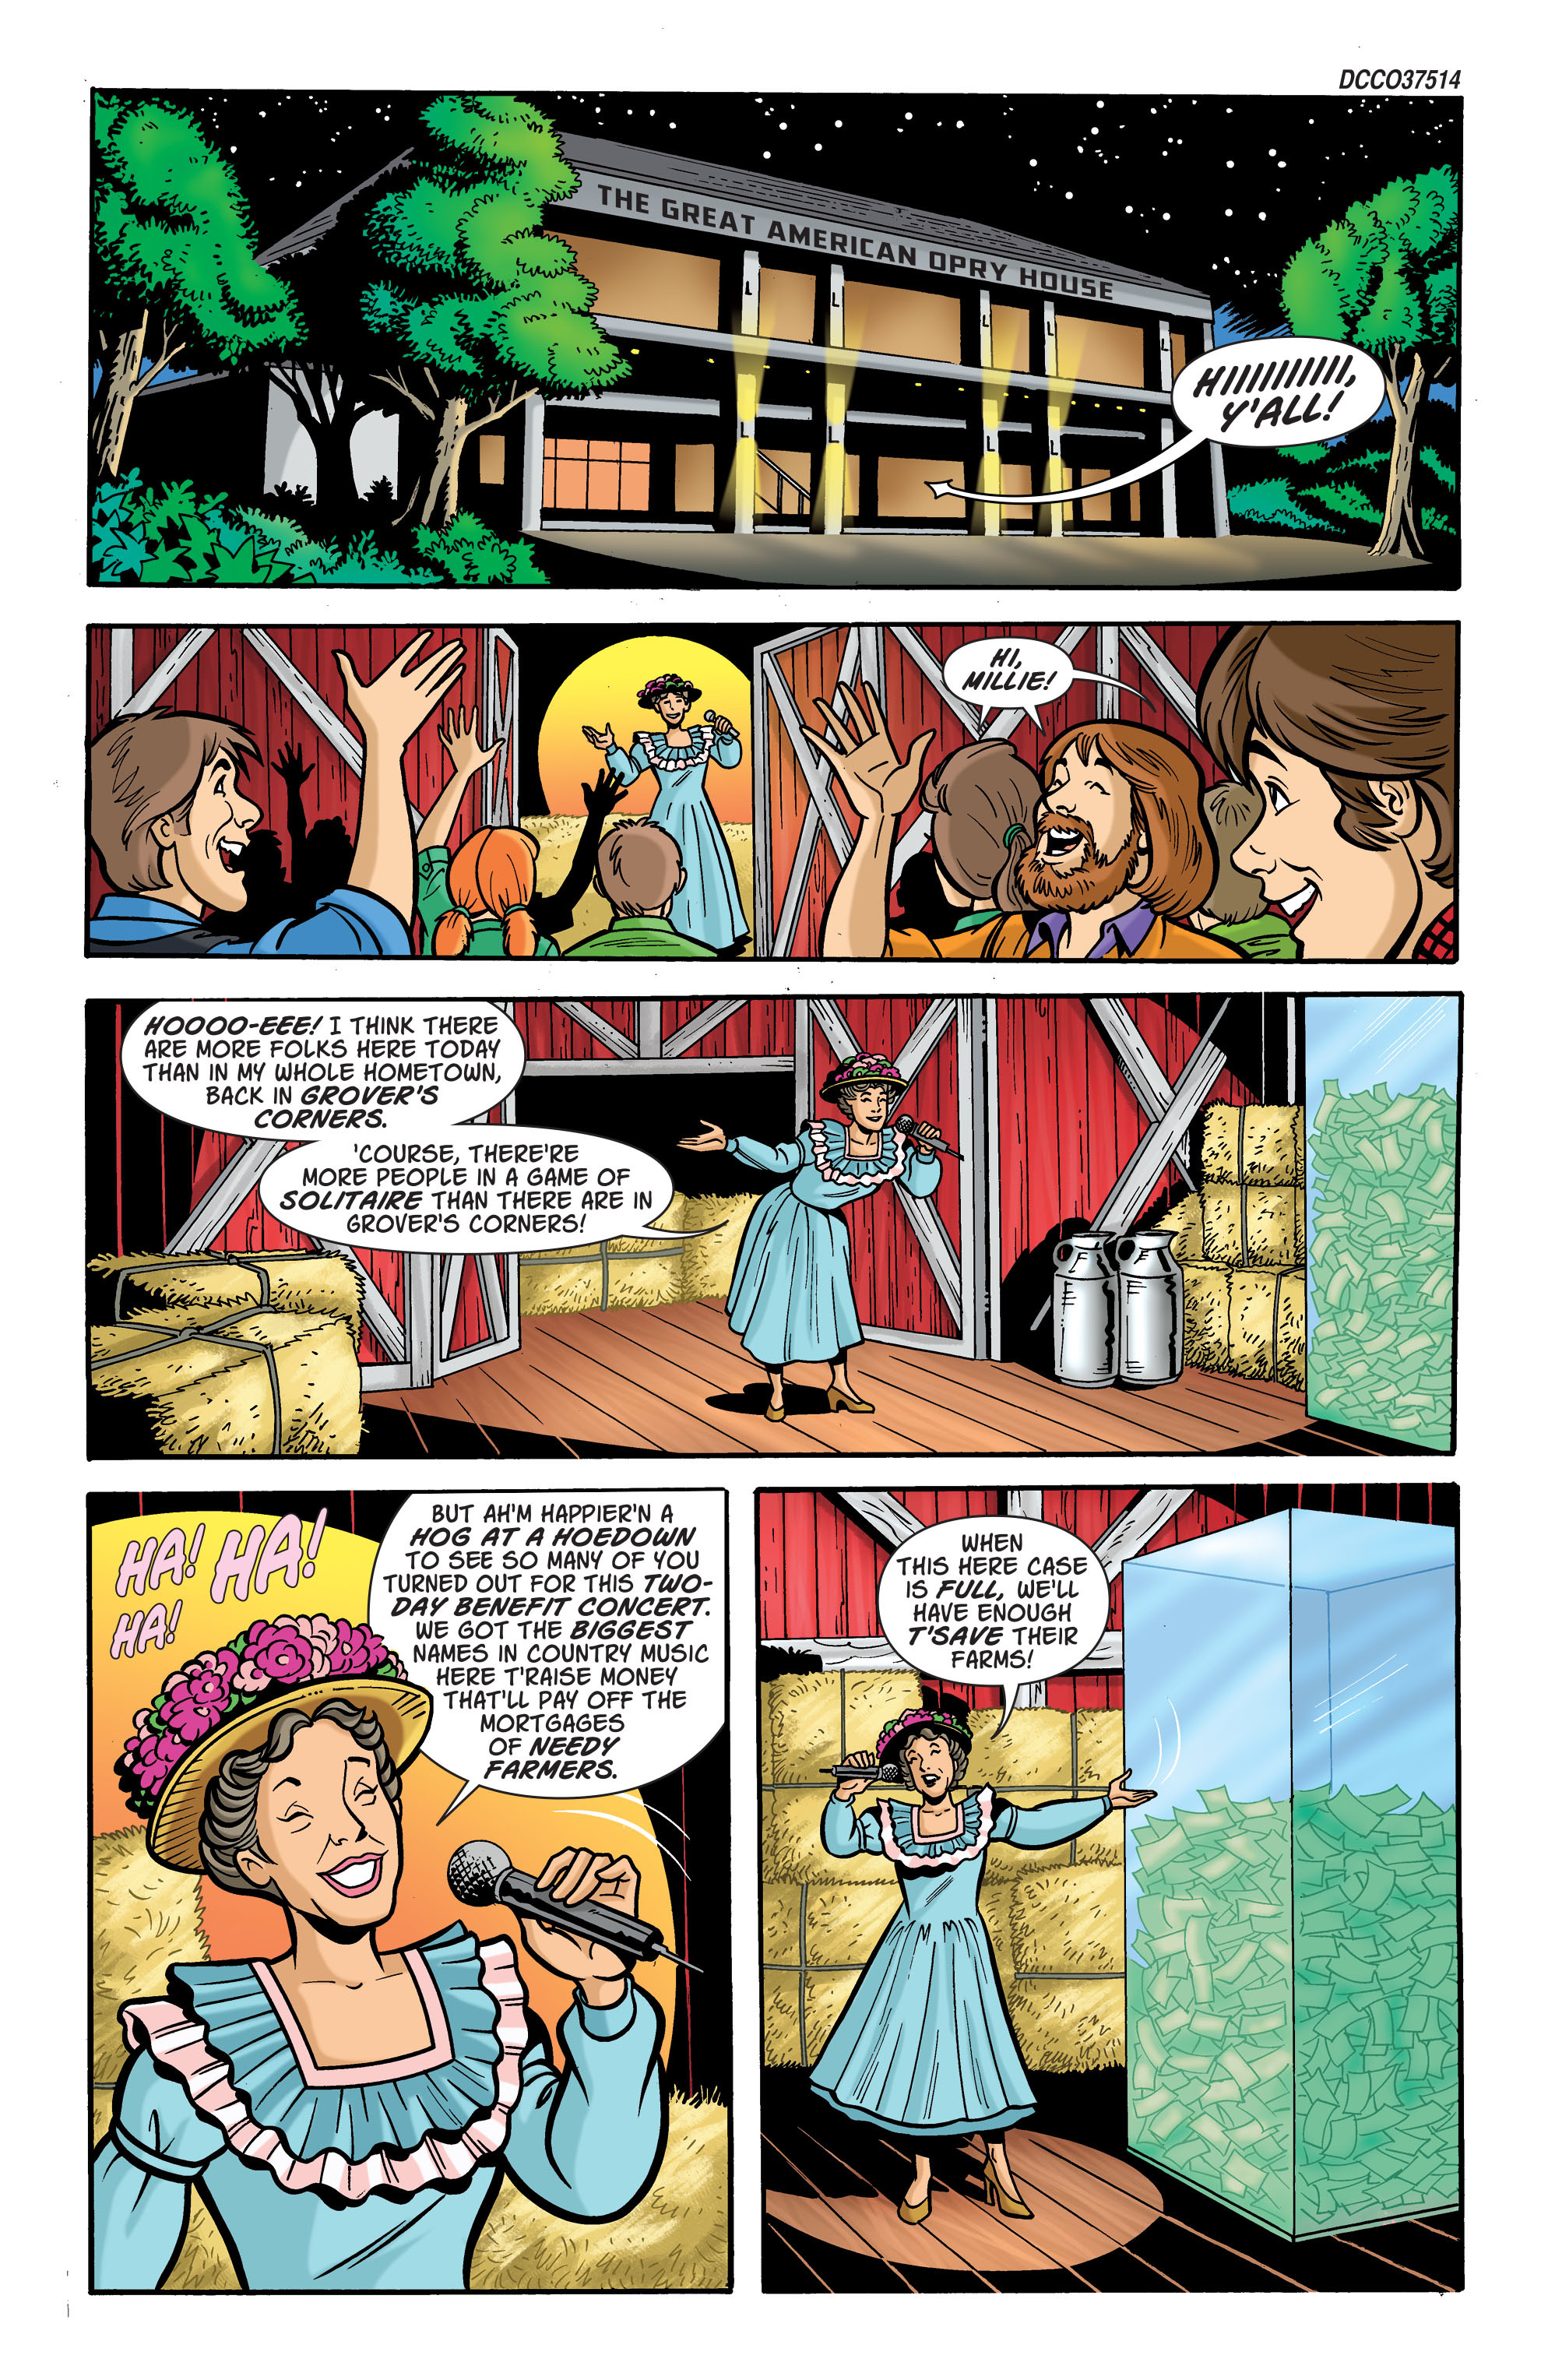 Scooby-Doo, Where Are You? (2010-): Chapter 72 - Page 2